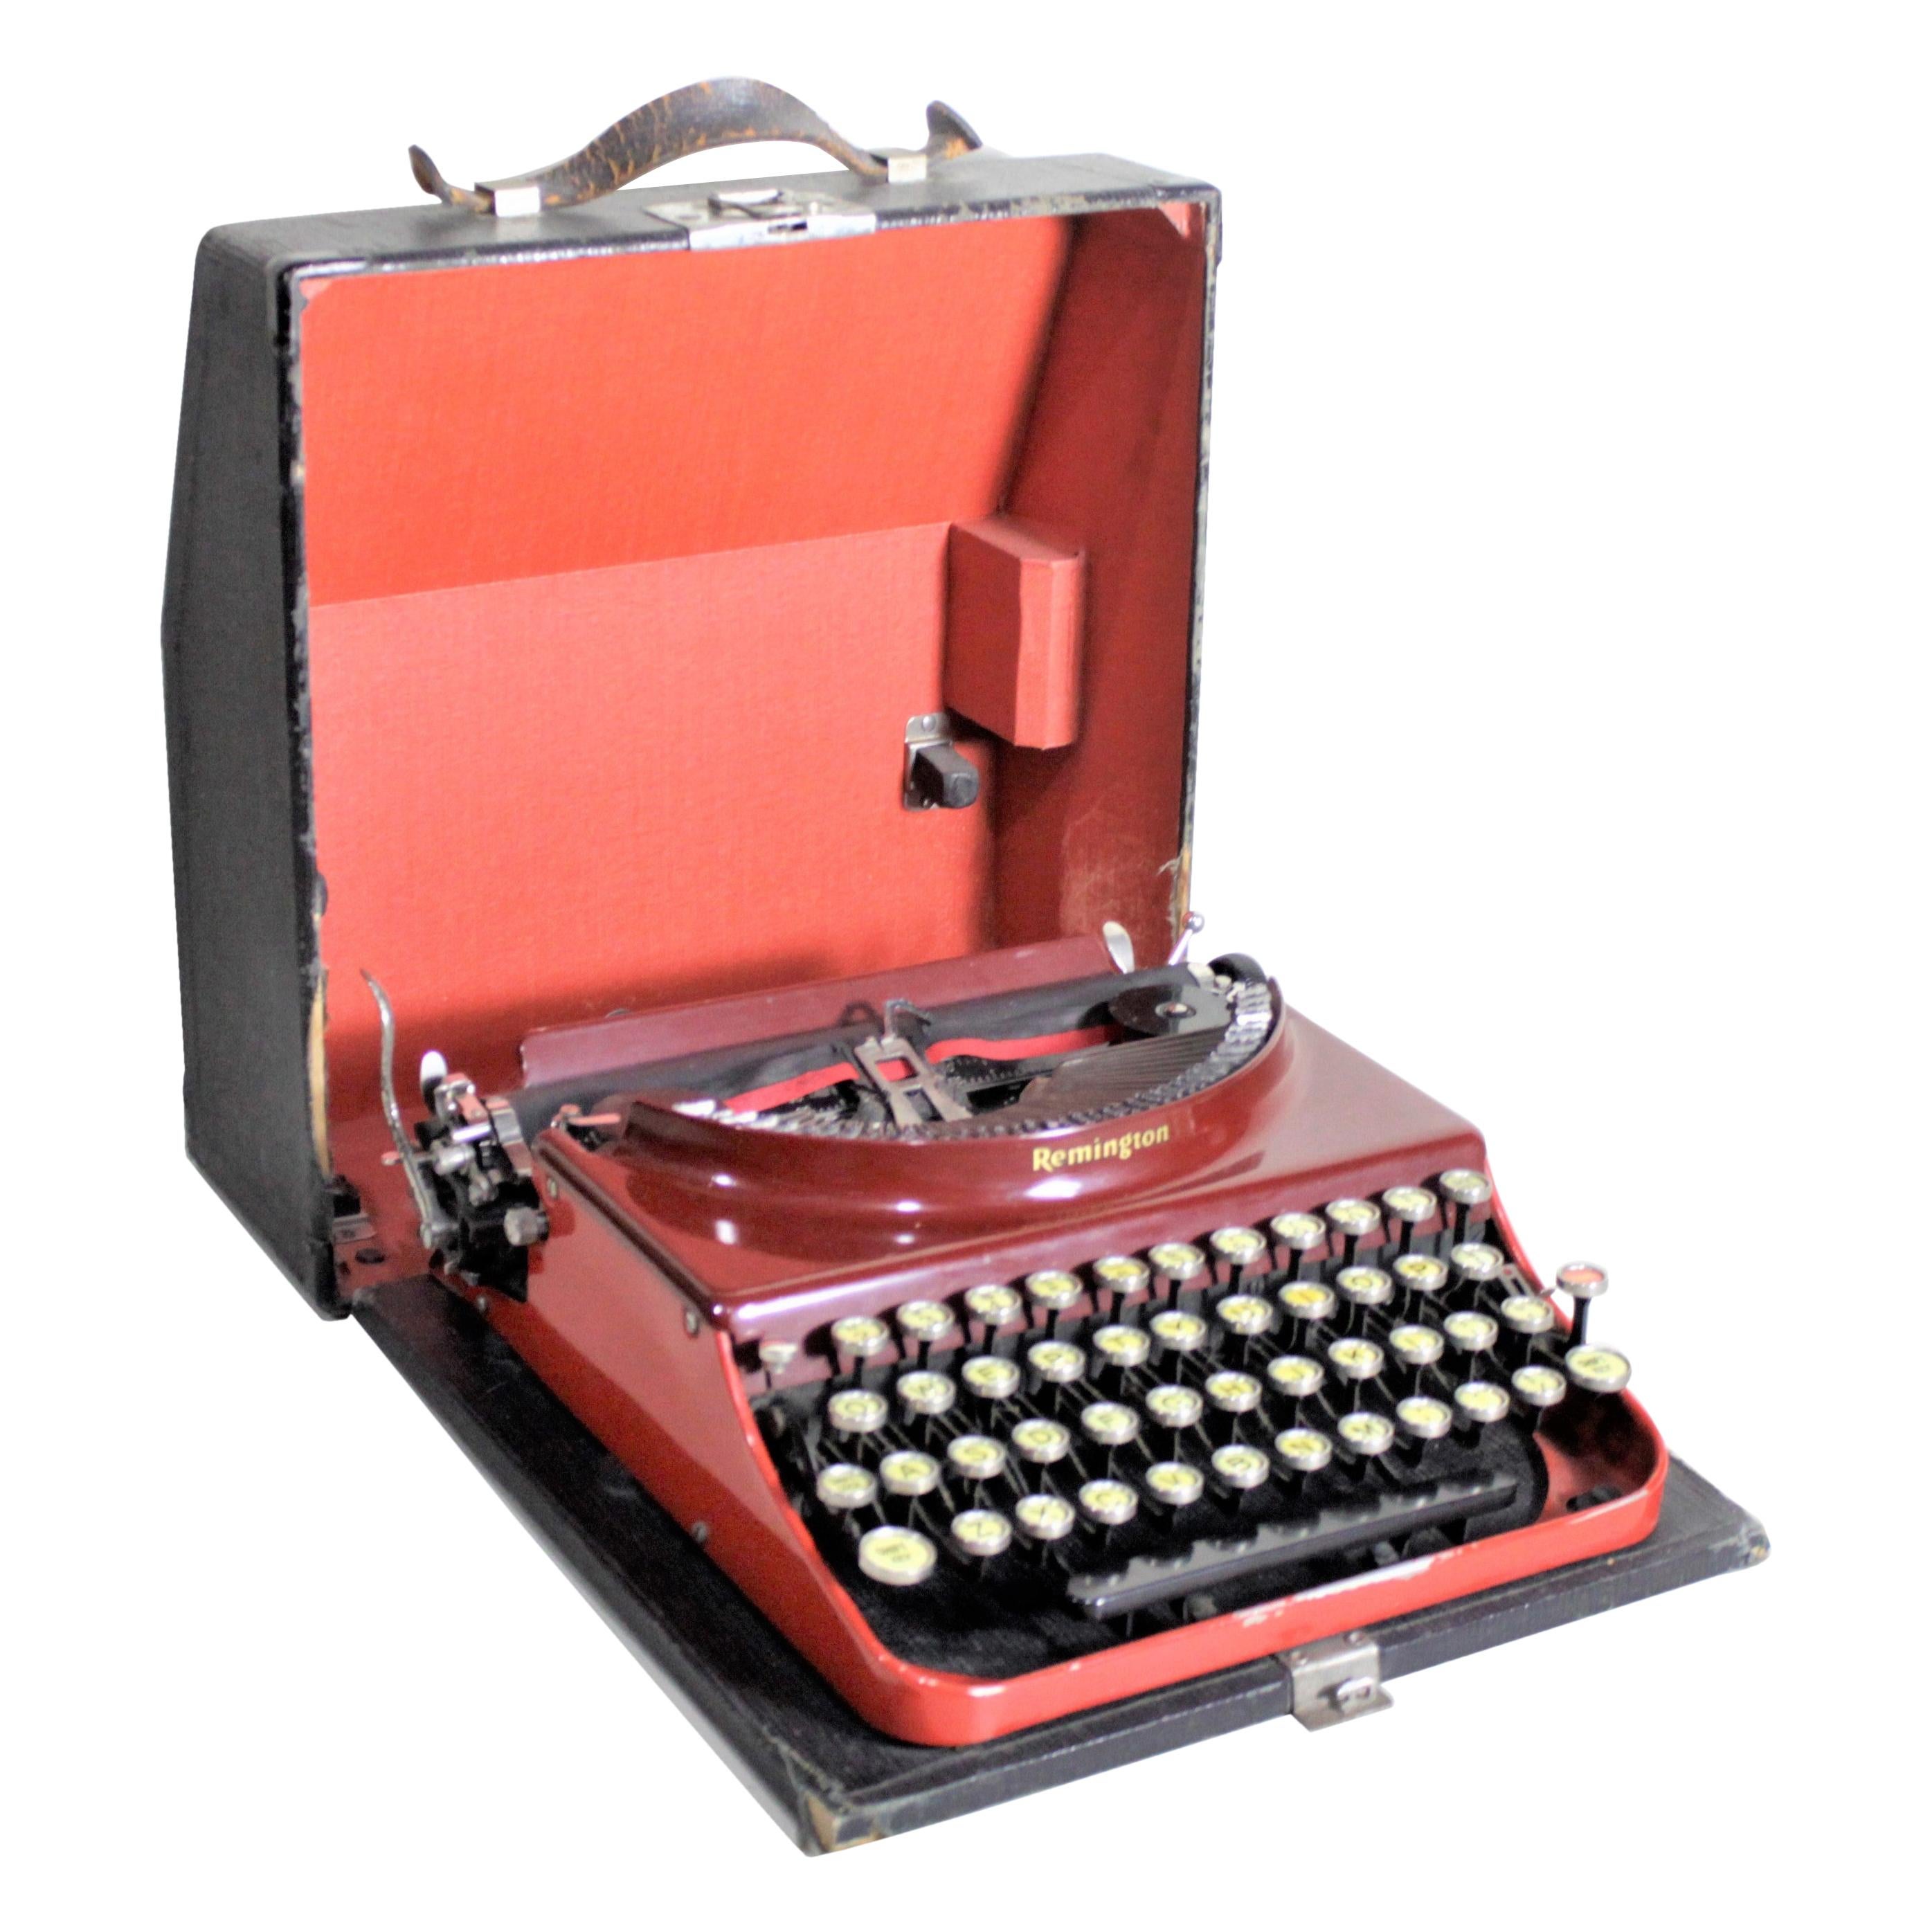 Art Deco Red Remington Rand No. 3 Streamlined Portable Typewriter with Hard Case